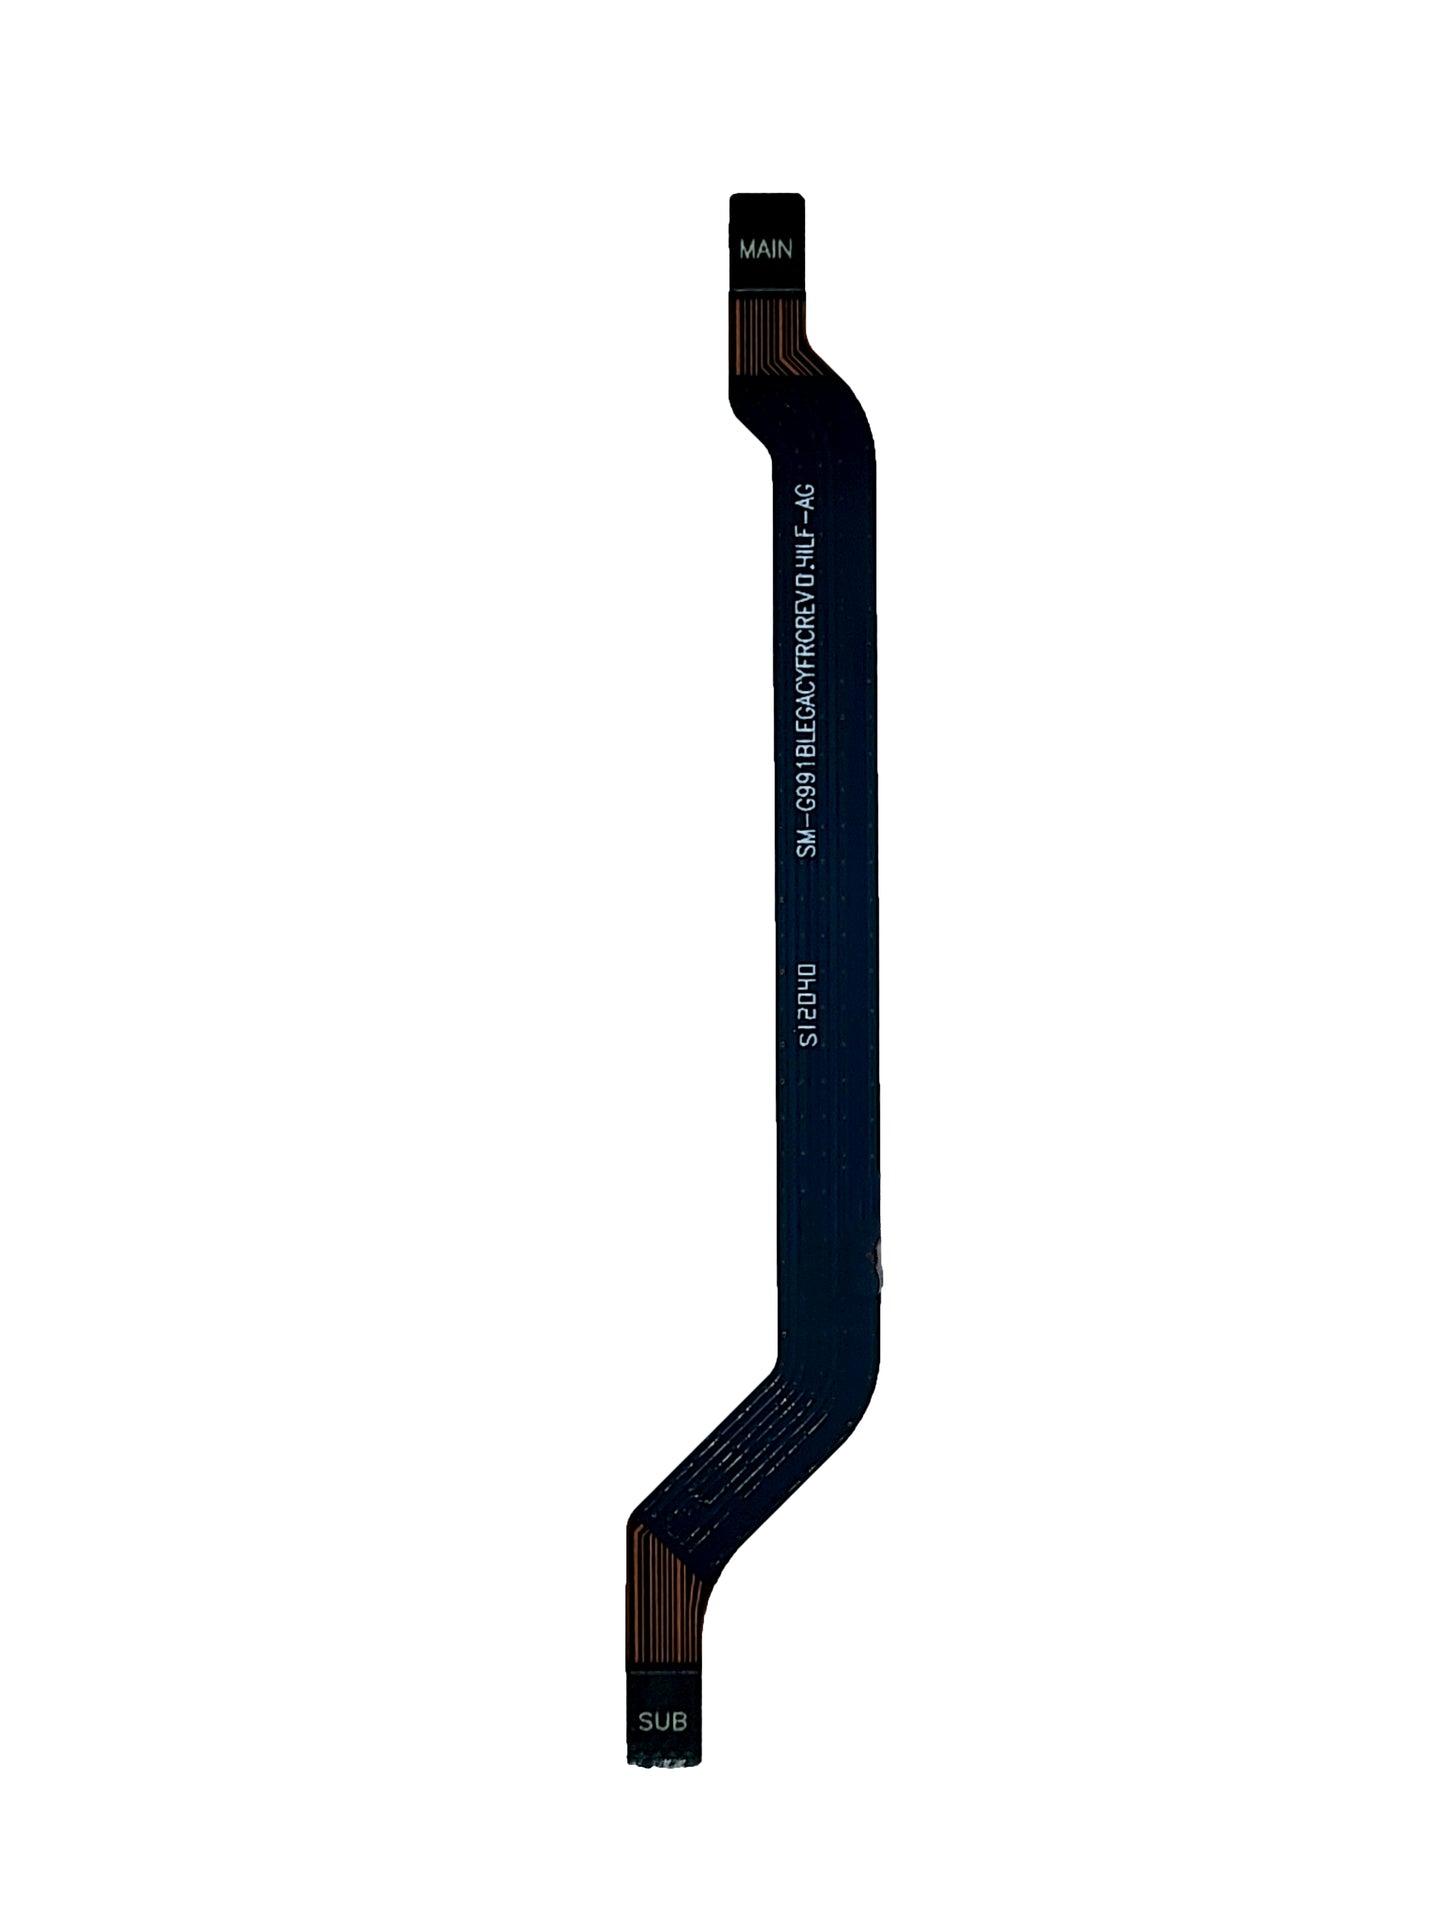 SGS S21 Antenna Connecting Cable (USA Version)